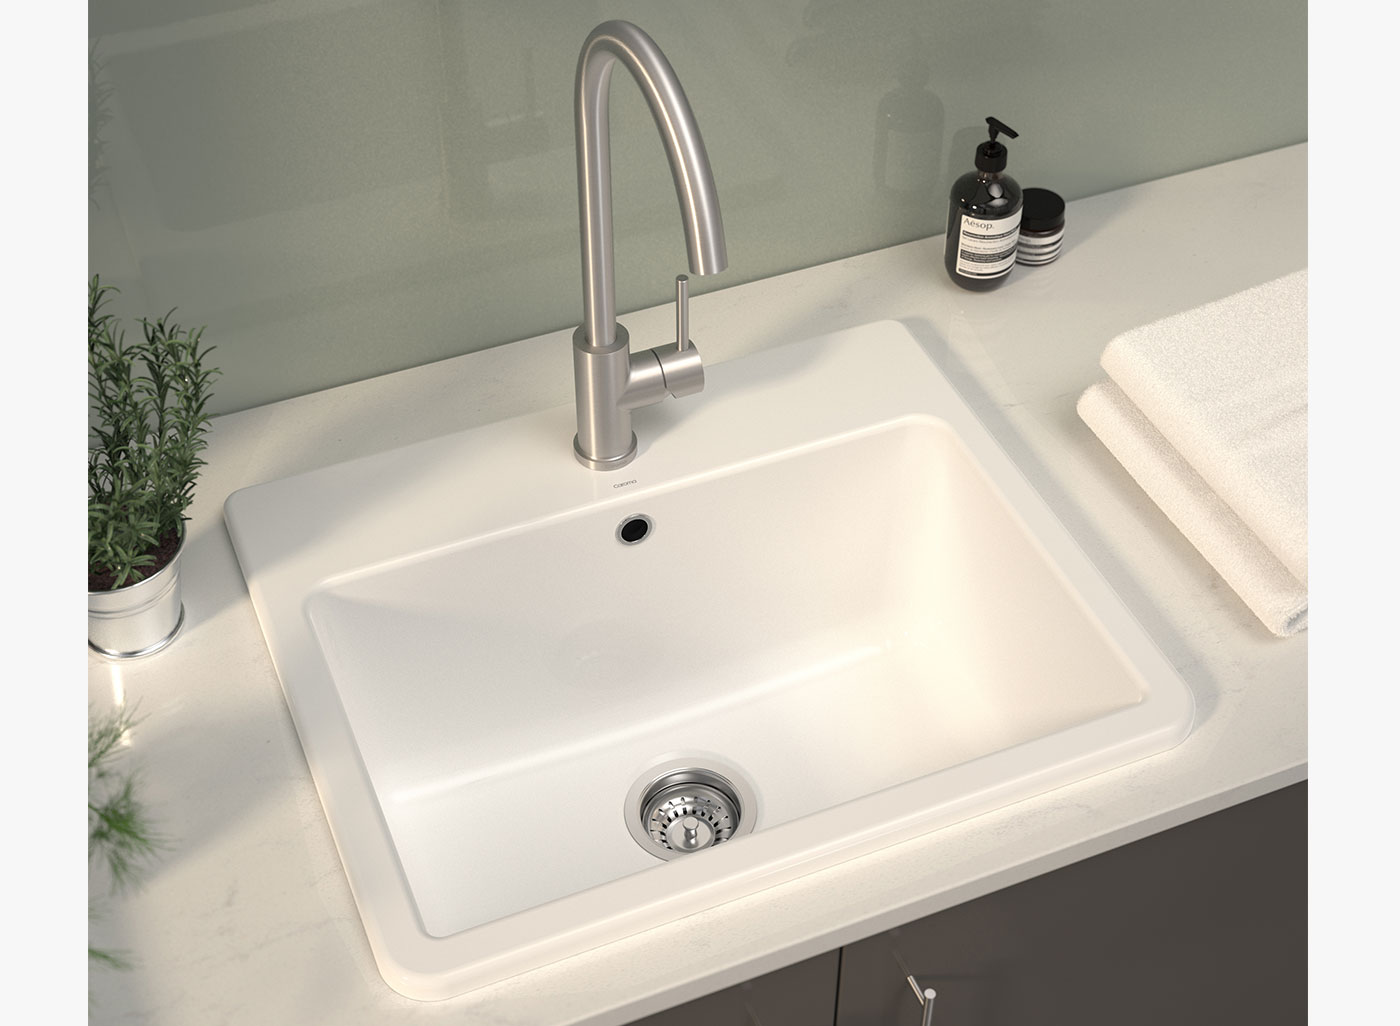 the stylish ceramic basin is an impressive design alternative to stainless steel tubs for laundry applications. The basin has been designed with a generous bowl capacity of 34L that is suitable for all purposes.